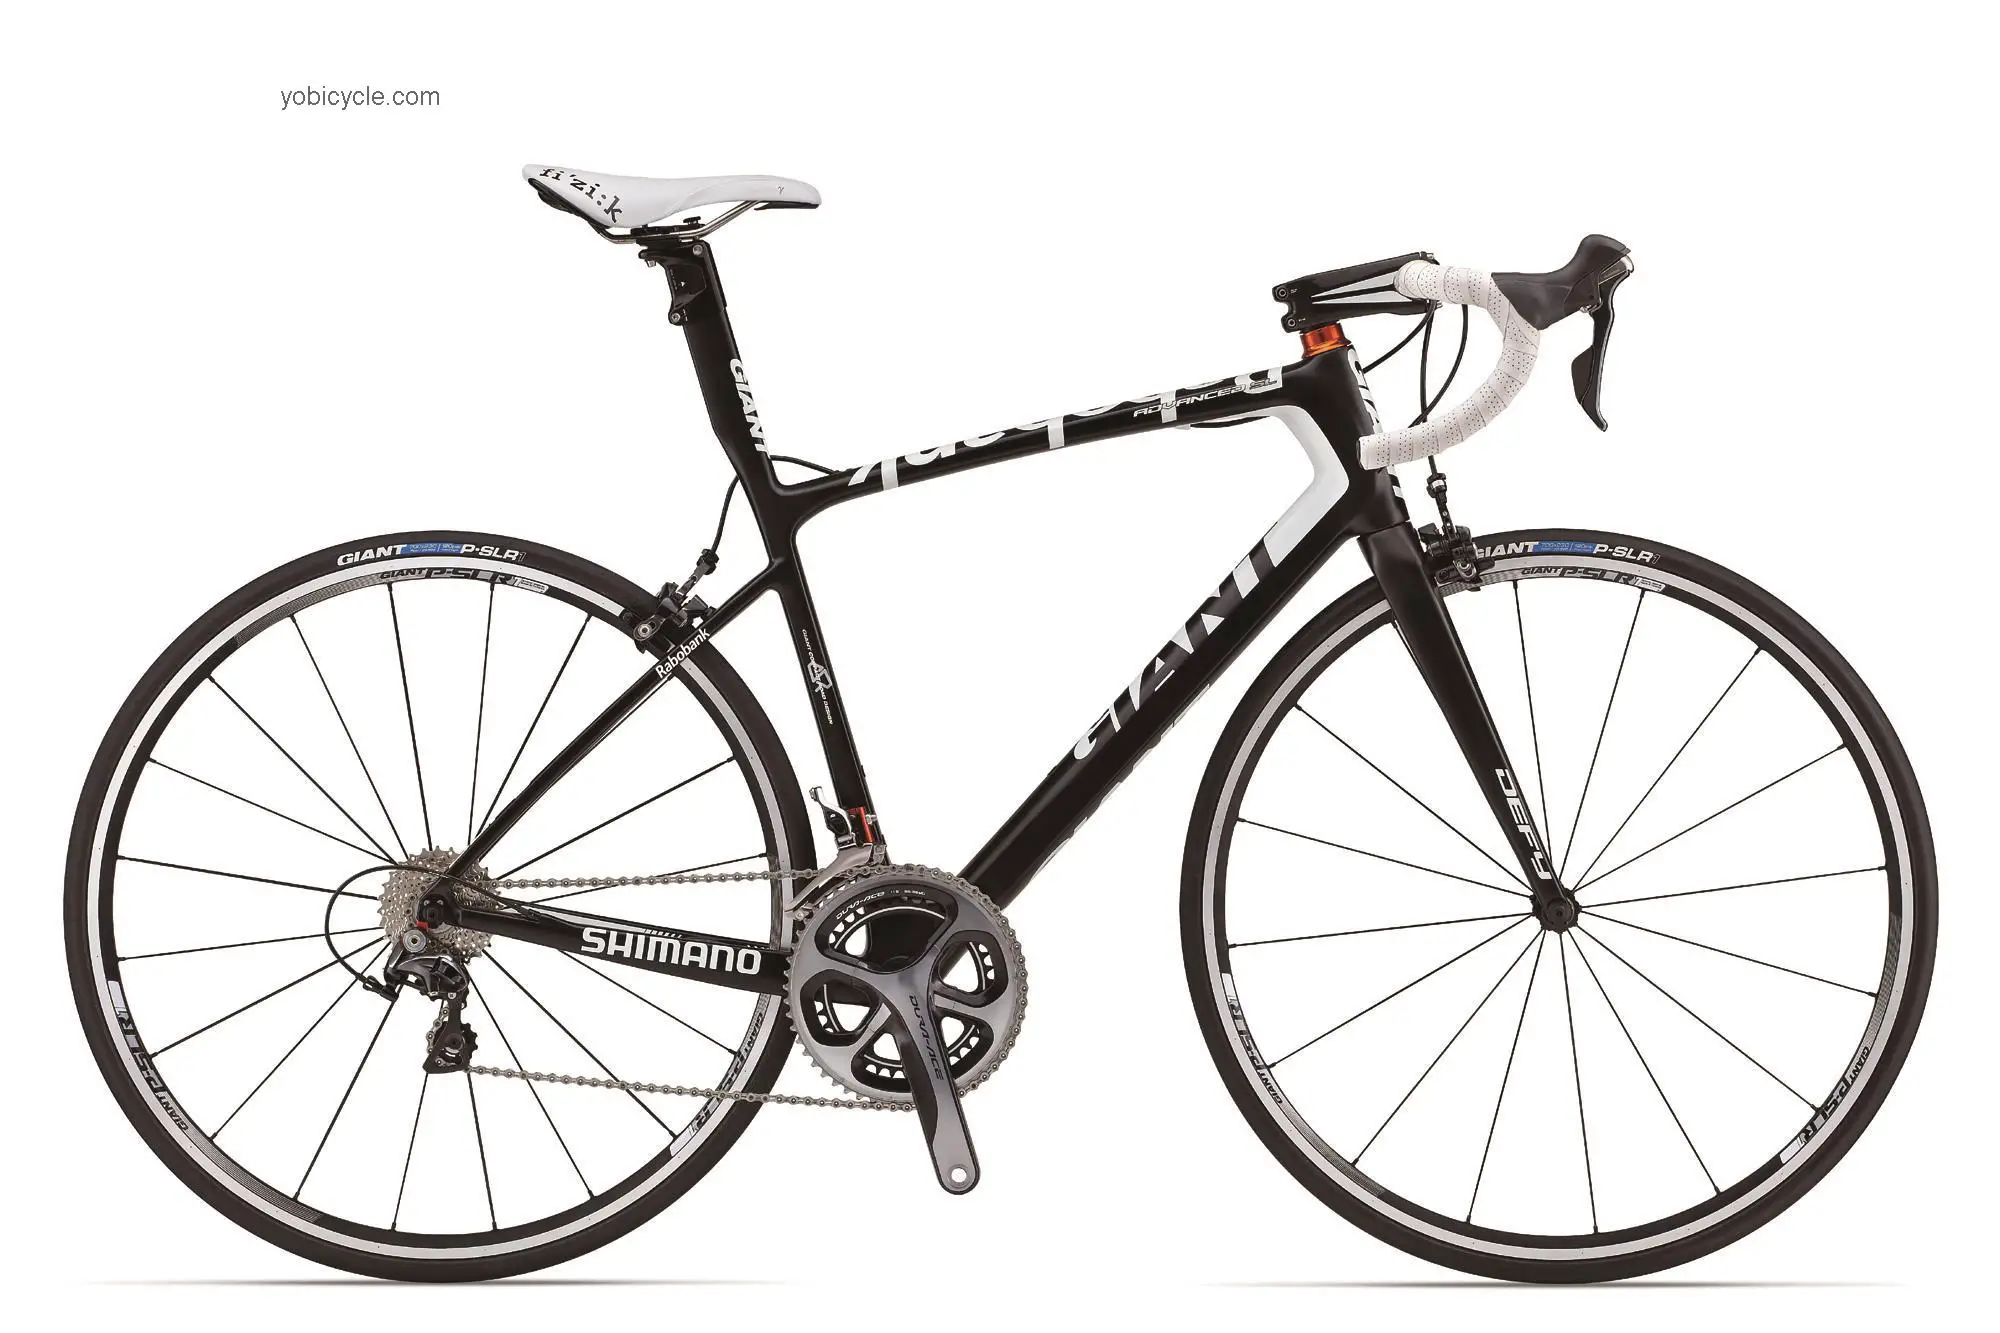 Giant Defy Advanced SL Rab 2013 comparison online with competitors